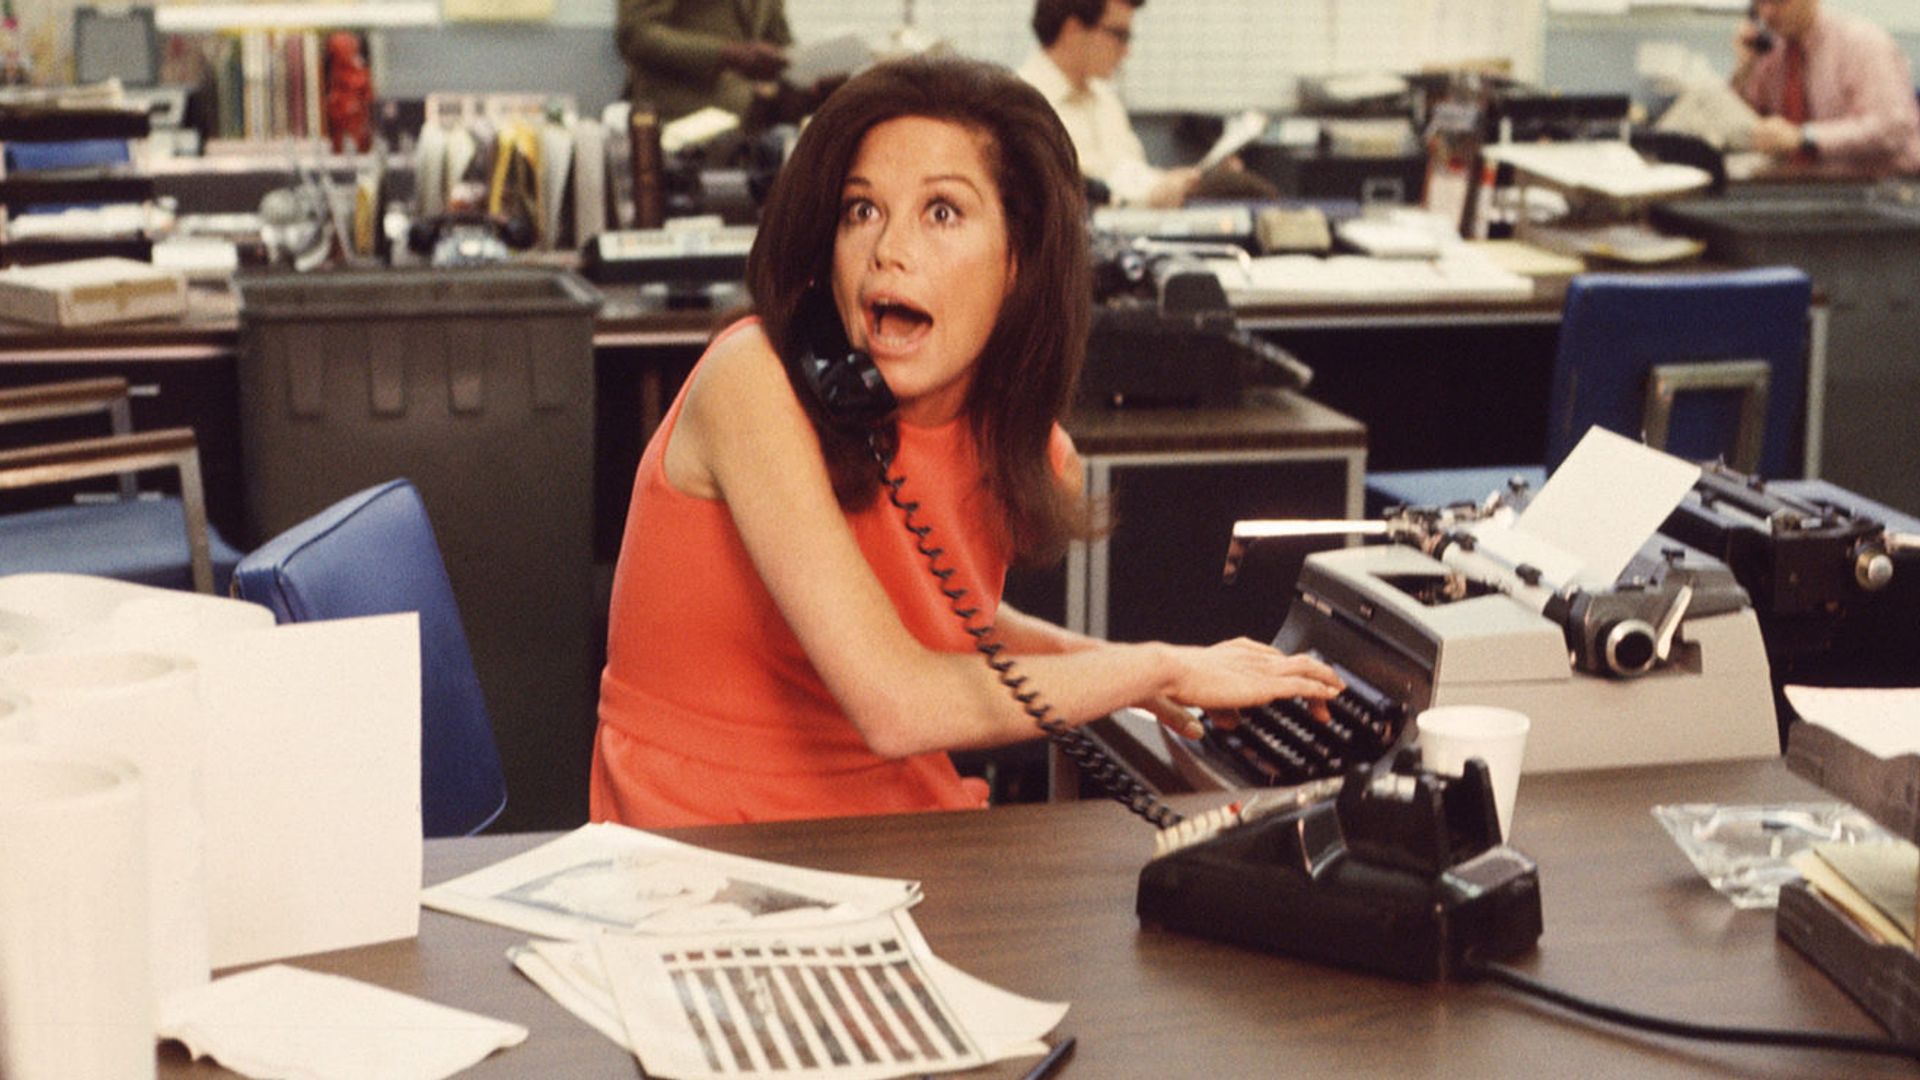 American actress Mary Tyler Moore mouths surprise on the telephone while simultaneously typing as others work in the background in a scene from 'The Mary Tyler Moore Show' (also known as 'Mary Tyler Moore'), Los Angeles, California, early 1970s. Moore wears a sleevless orange dress as she sits behind her desk. (Photo by CBS Photo Archive/Getty Images)